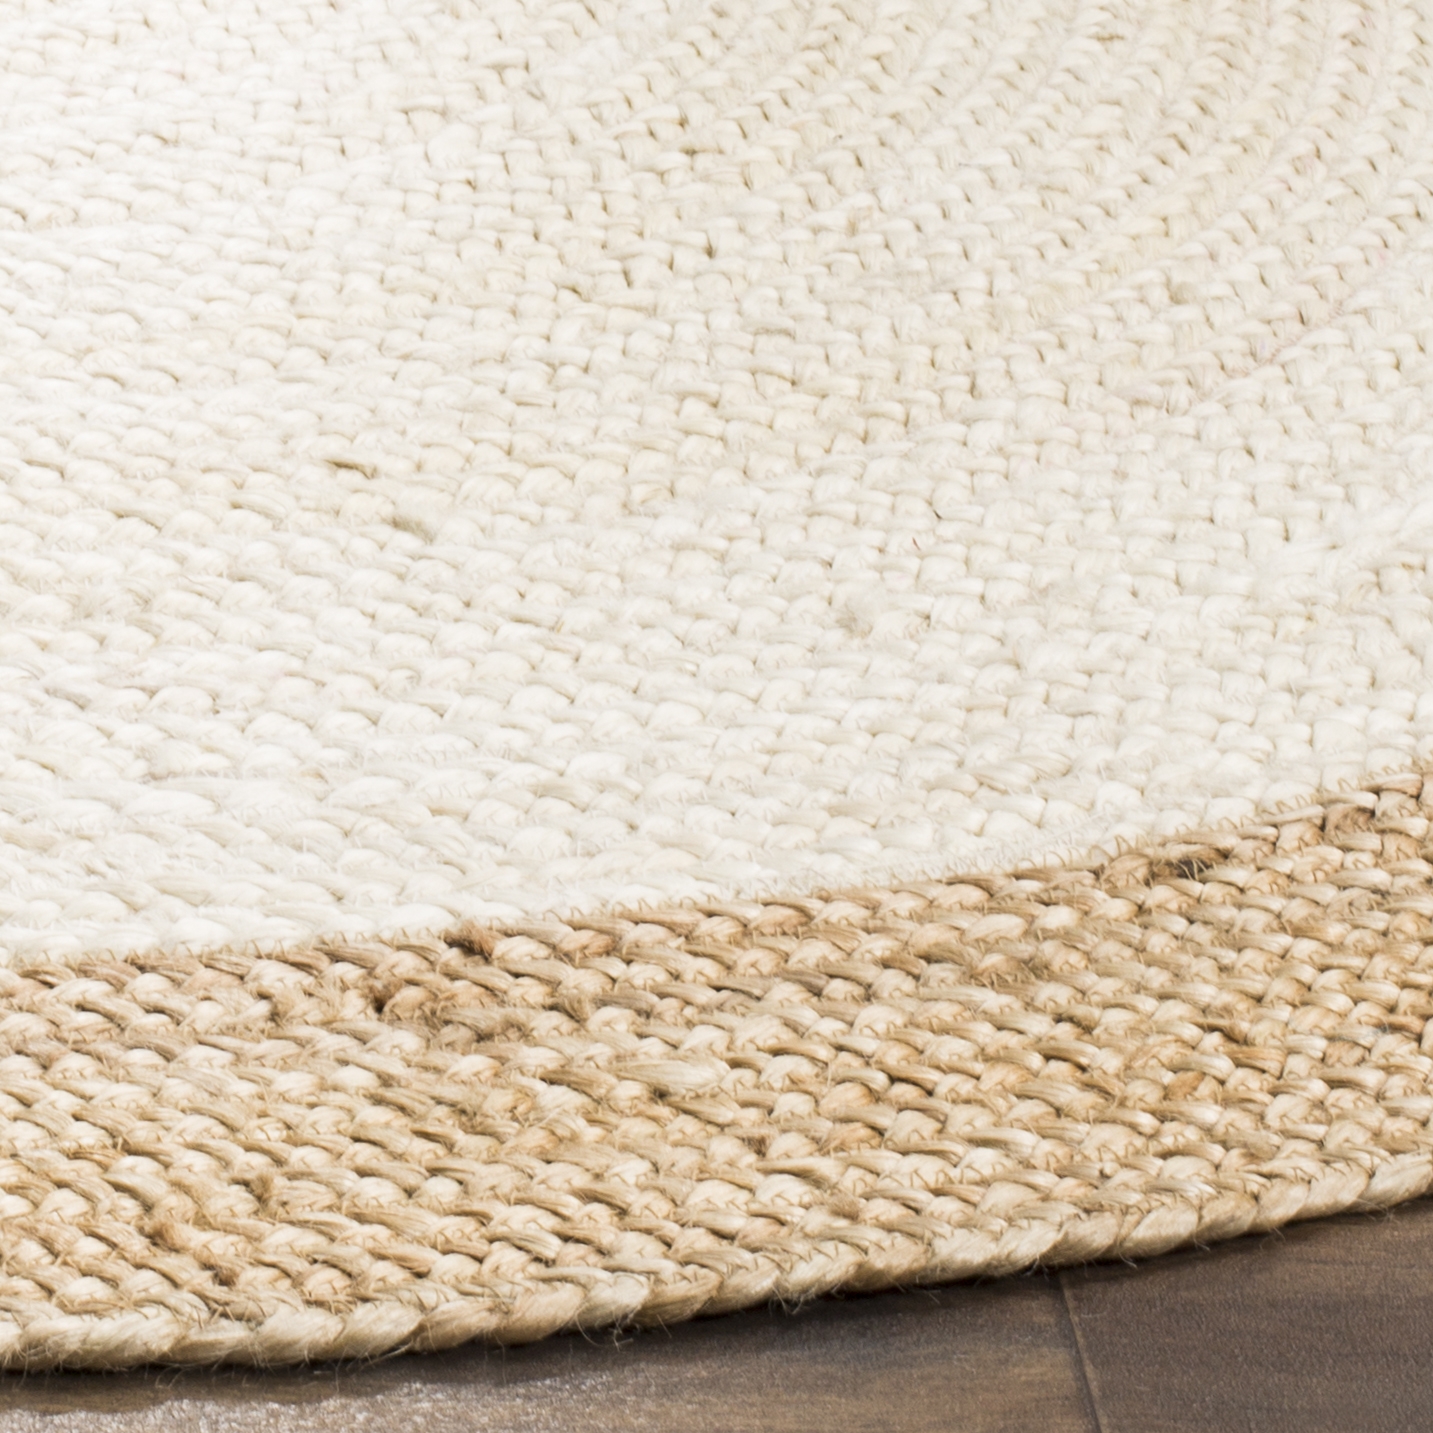 Arlo Home Hand Woven Area Rug, NF801M, Ivory/Natural,  4' X 4' Round - Image 2